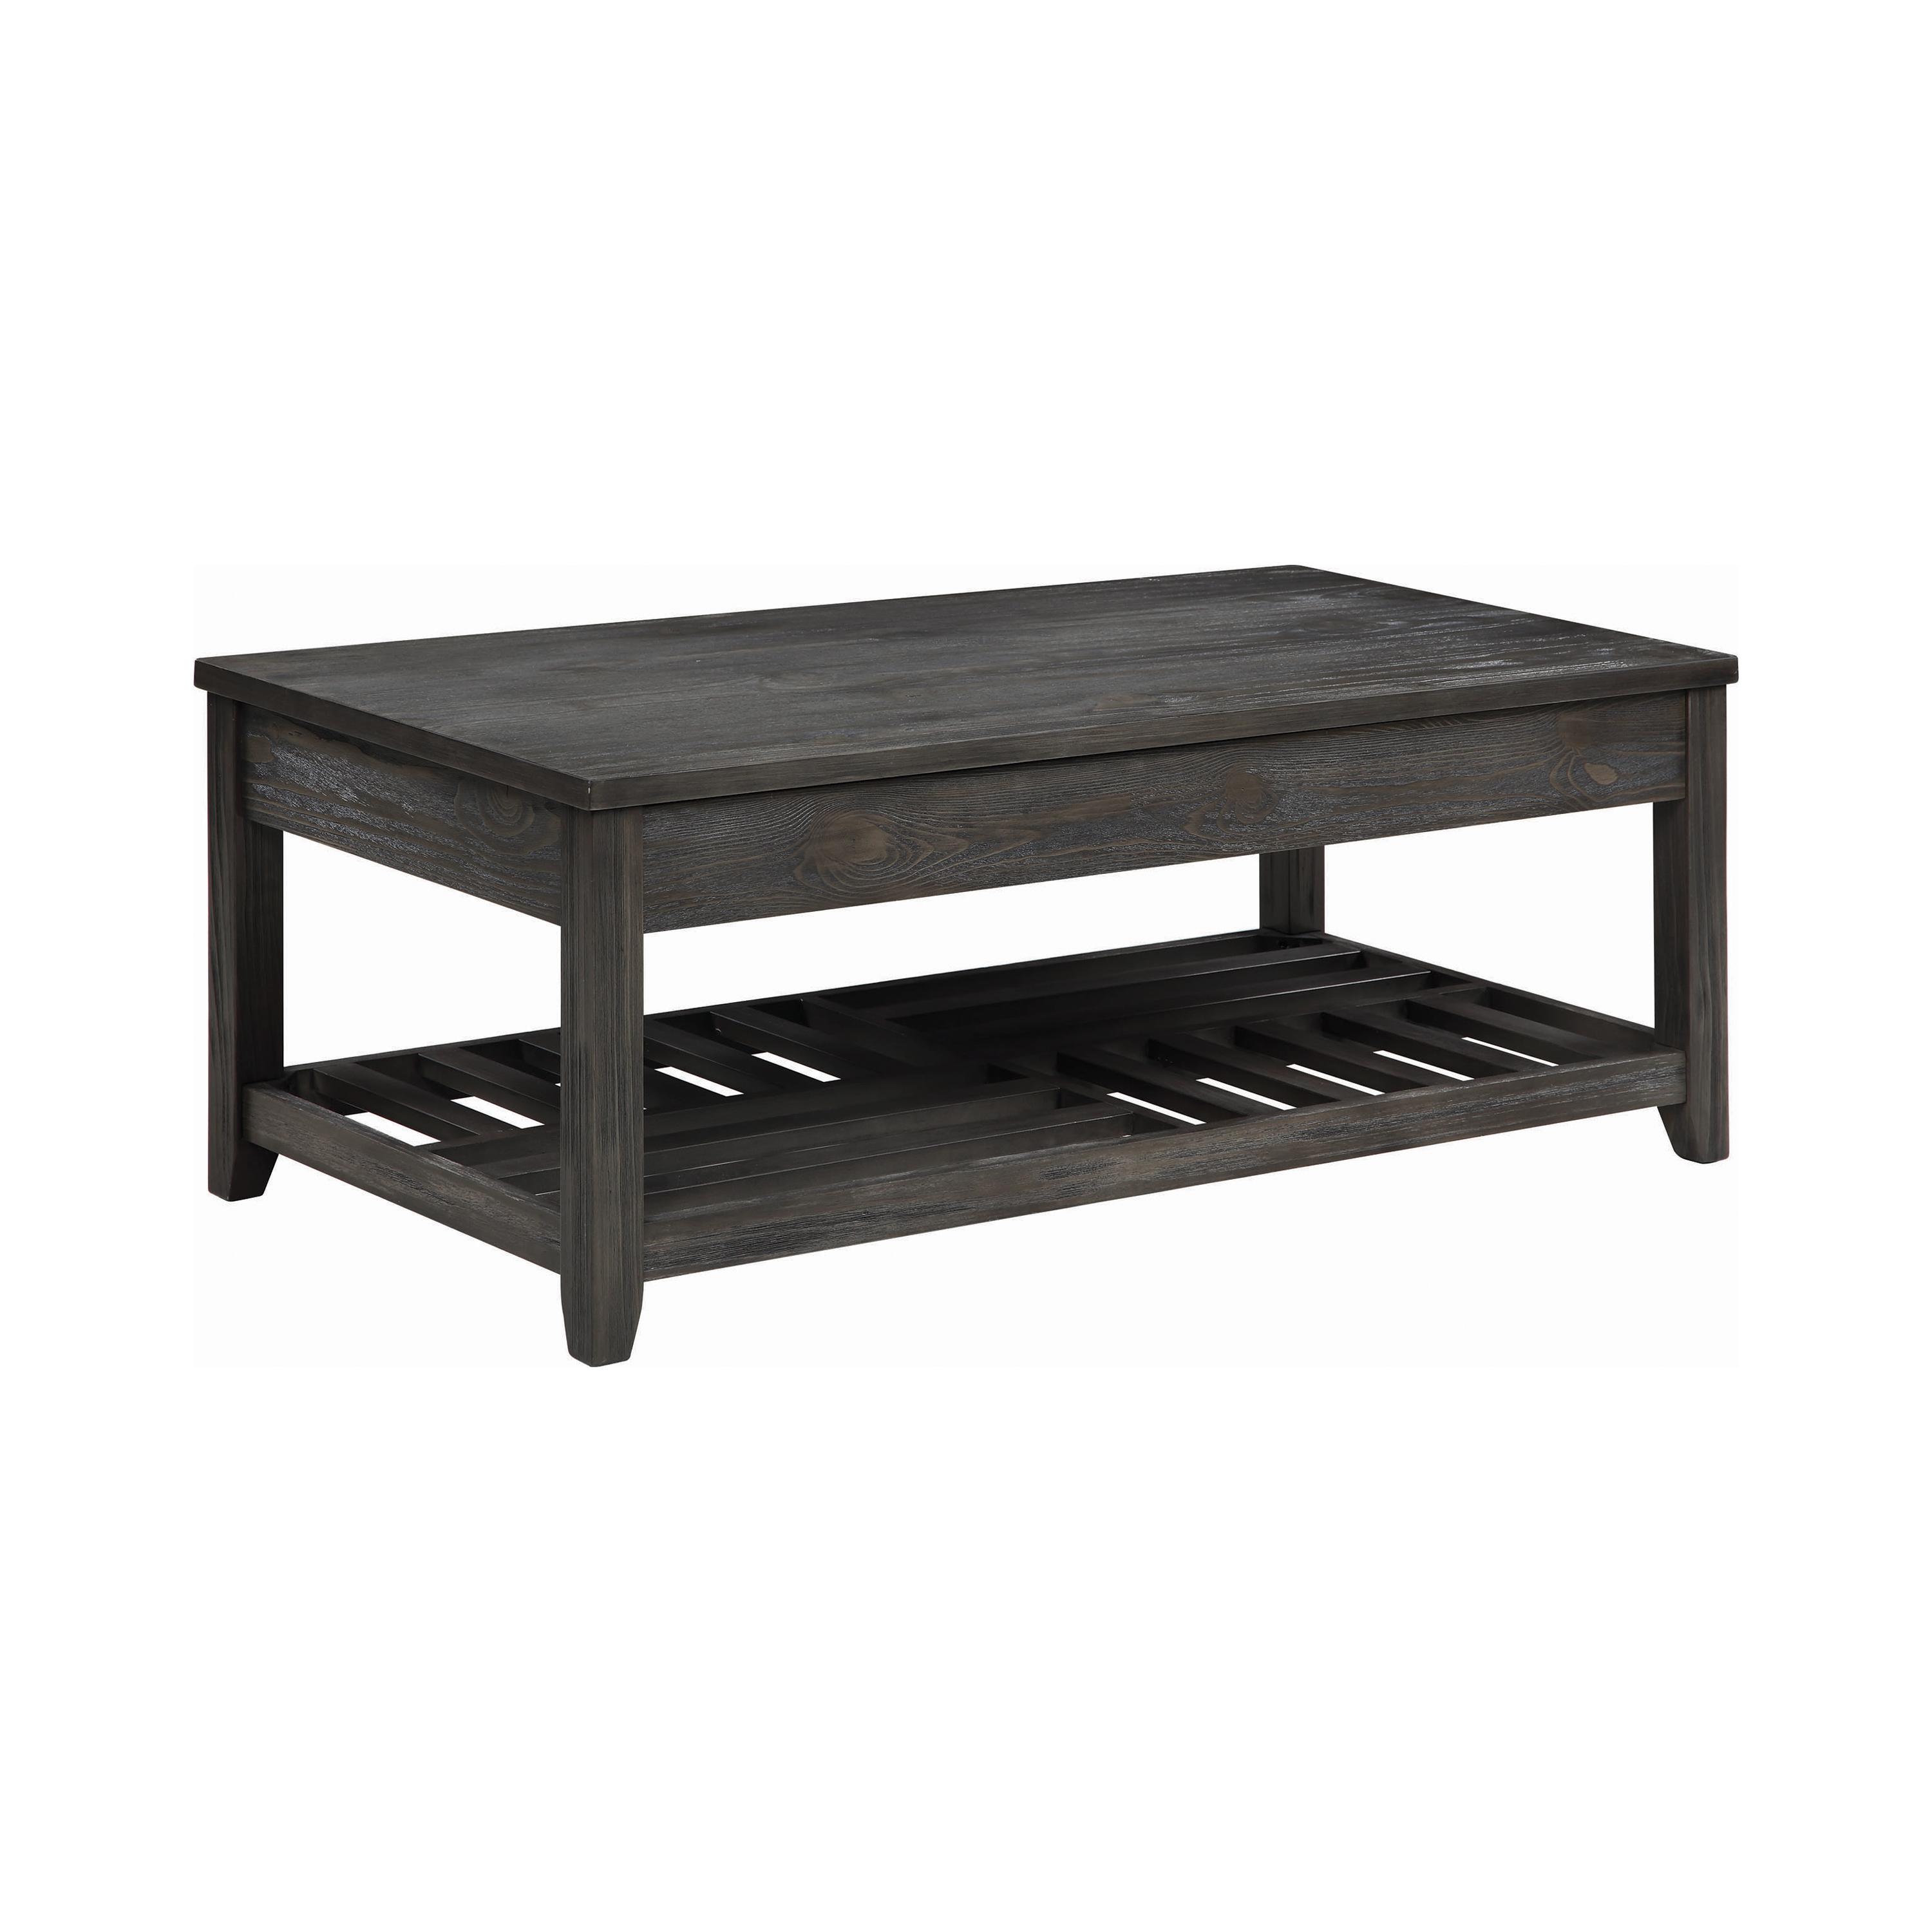 Transitional Coffee Table 722288 722288 in Gray 